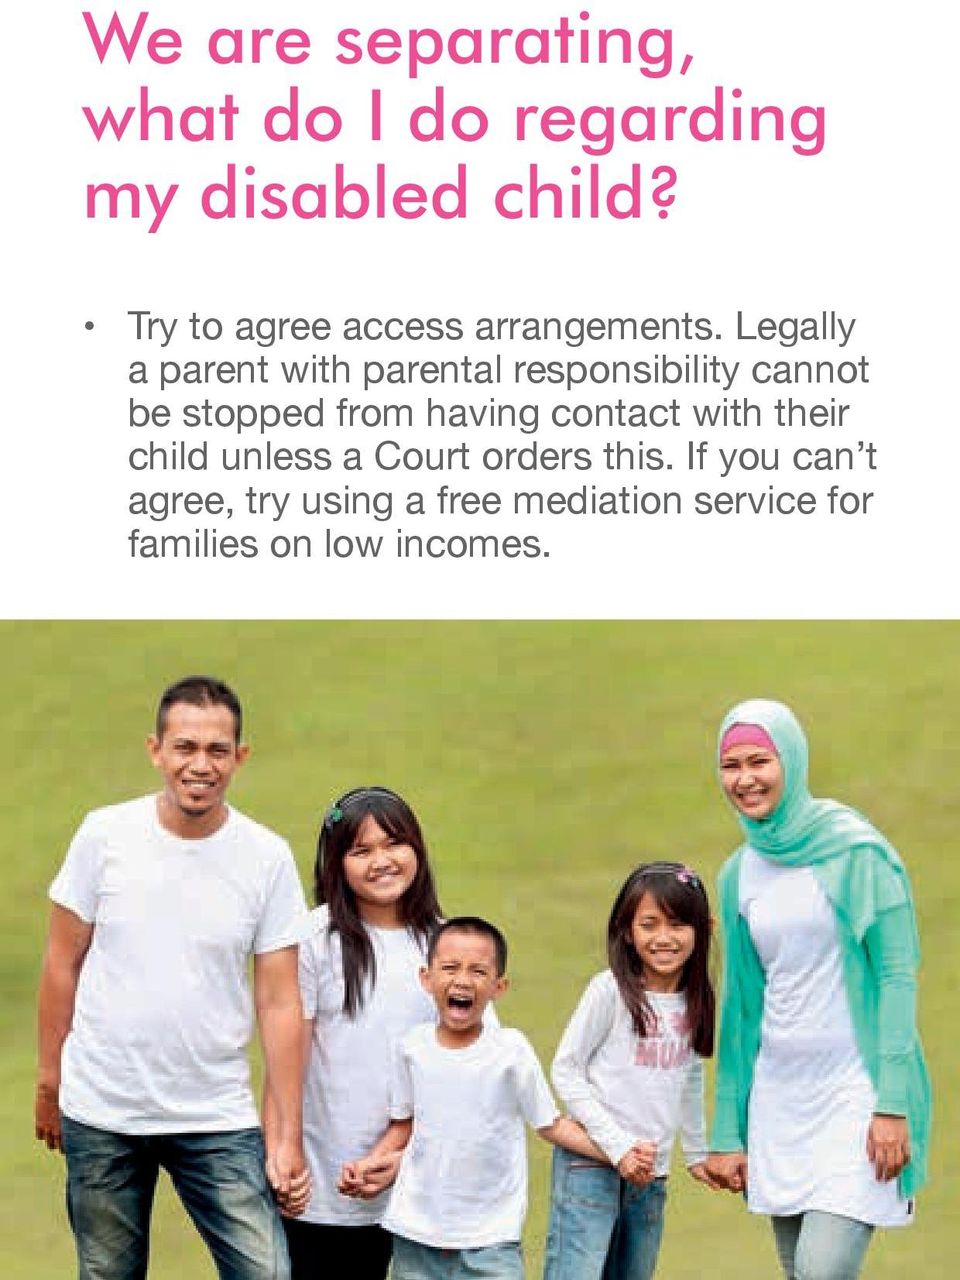 Legally a parent with parental responsibility cannot be stopped from having